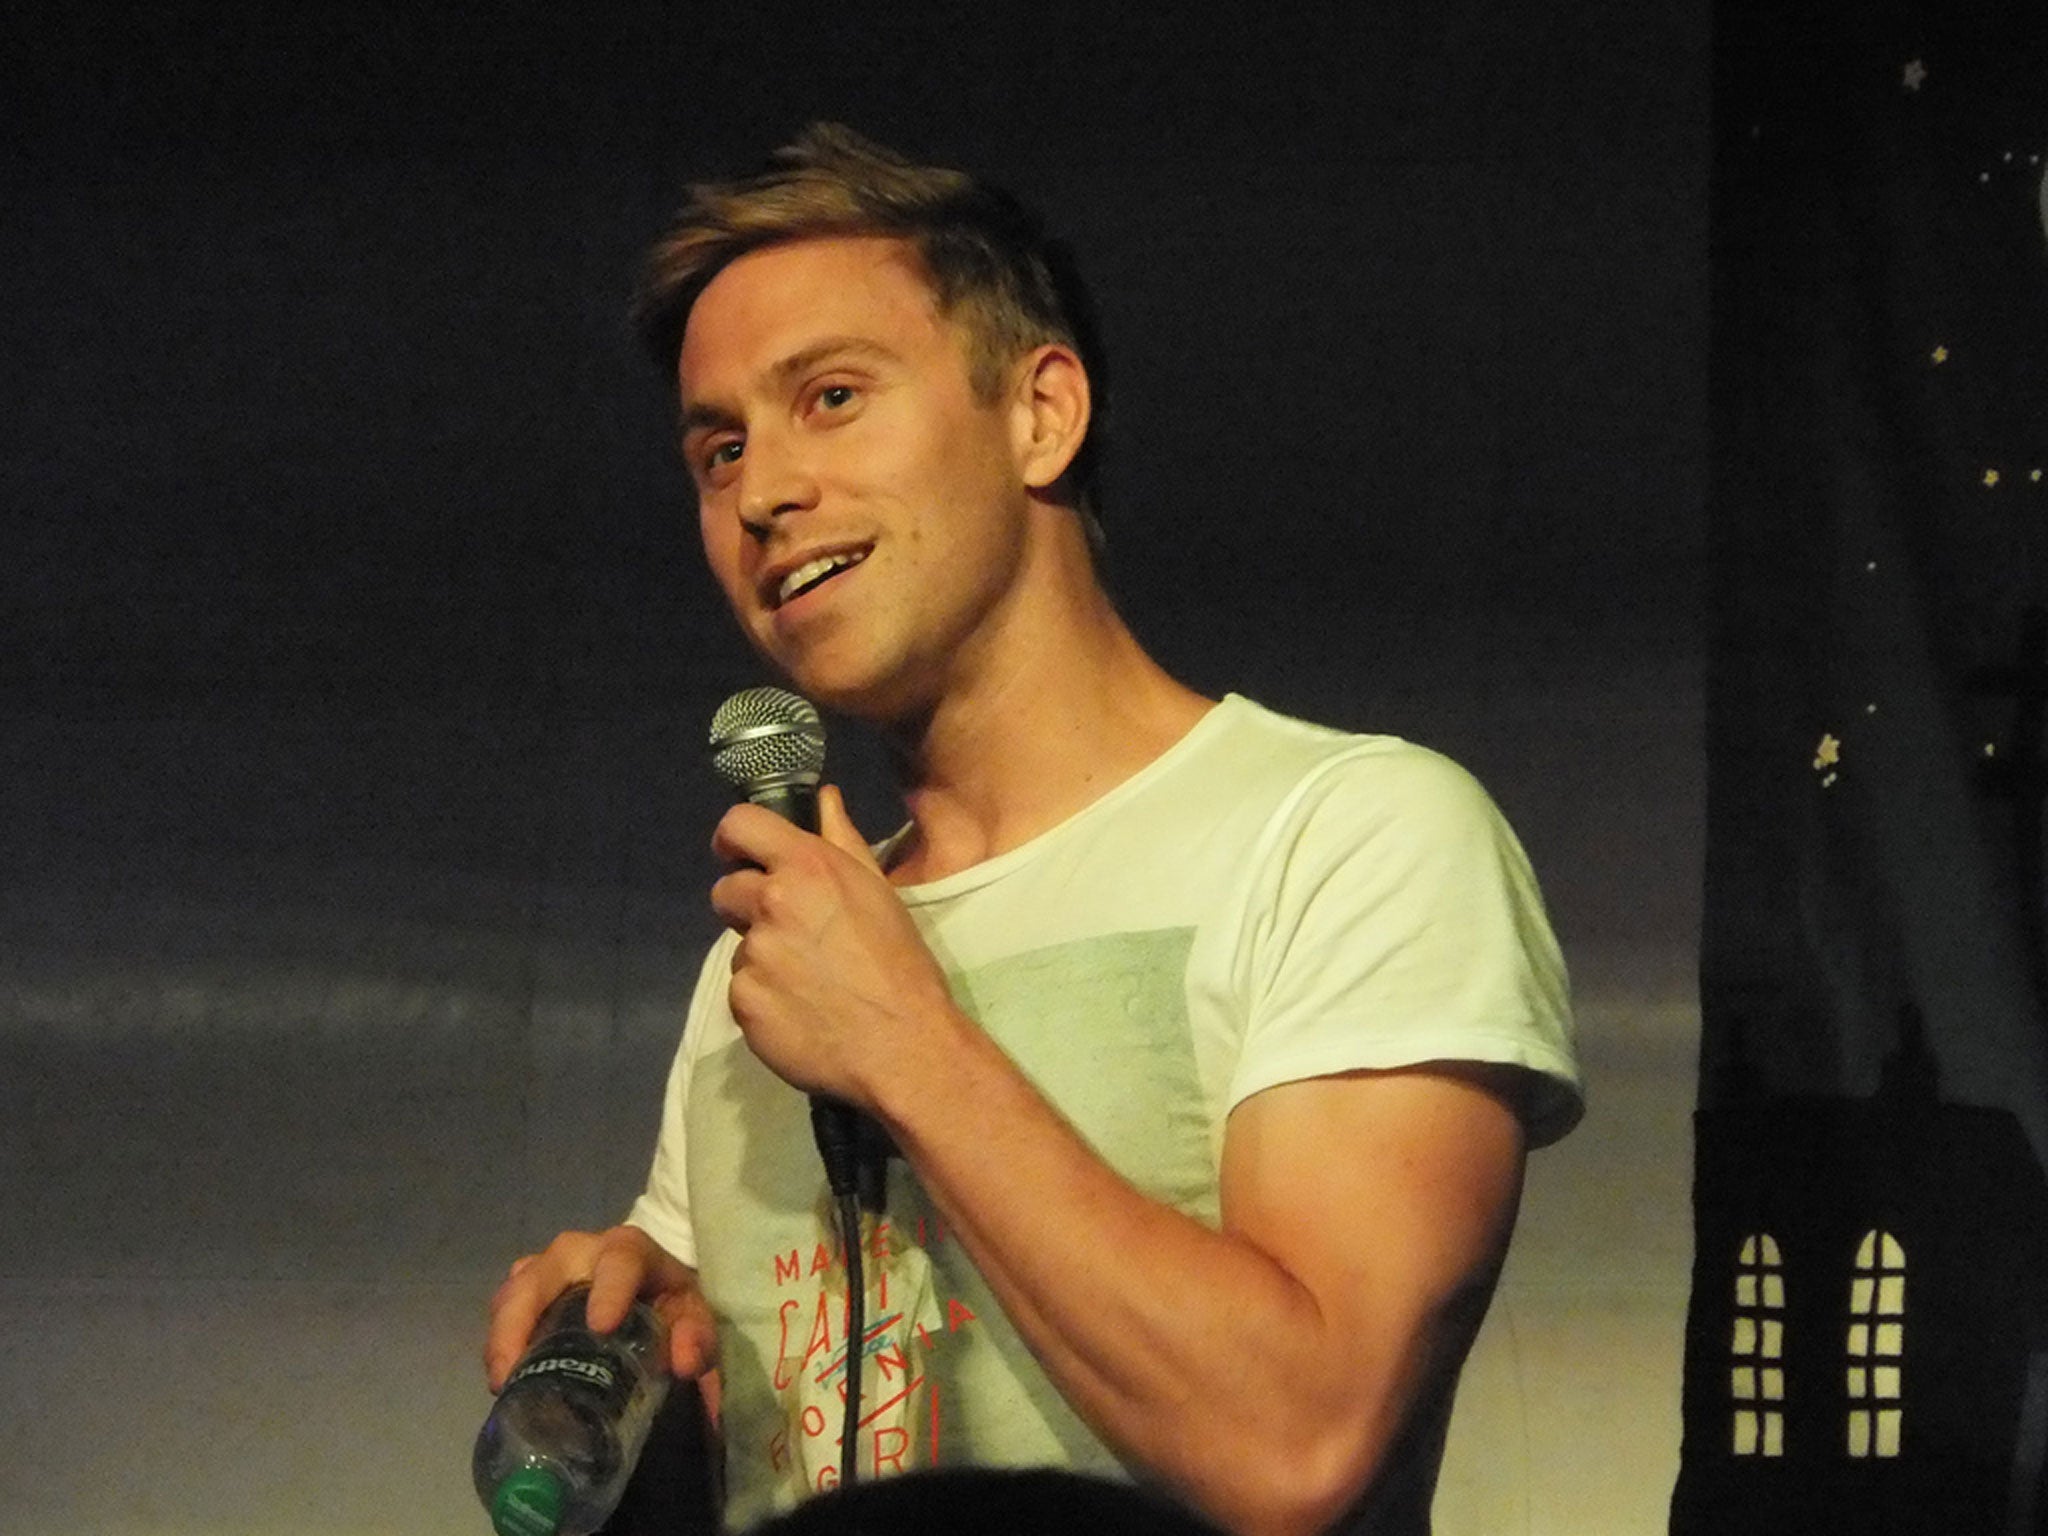 Russell Howard has been forced to deny that he has accepted an invitation to perform at an upcoming benefit gig for the Church of Scientology.